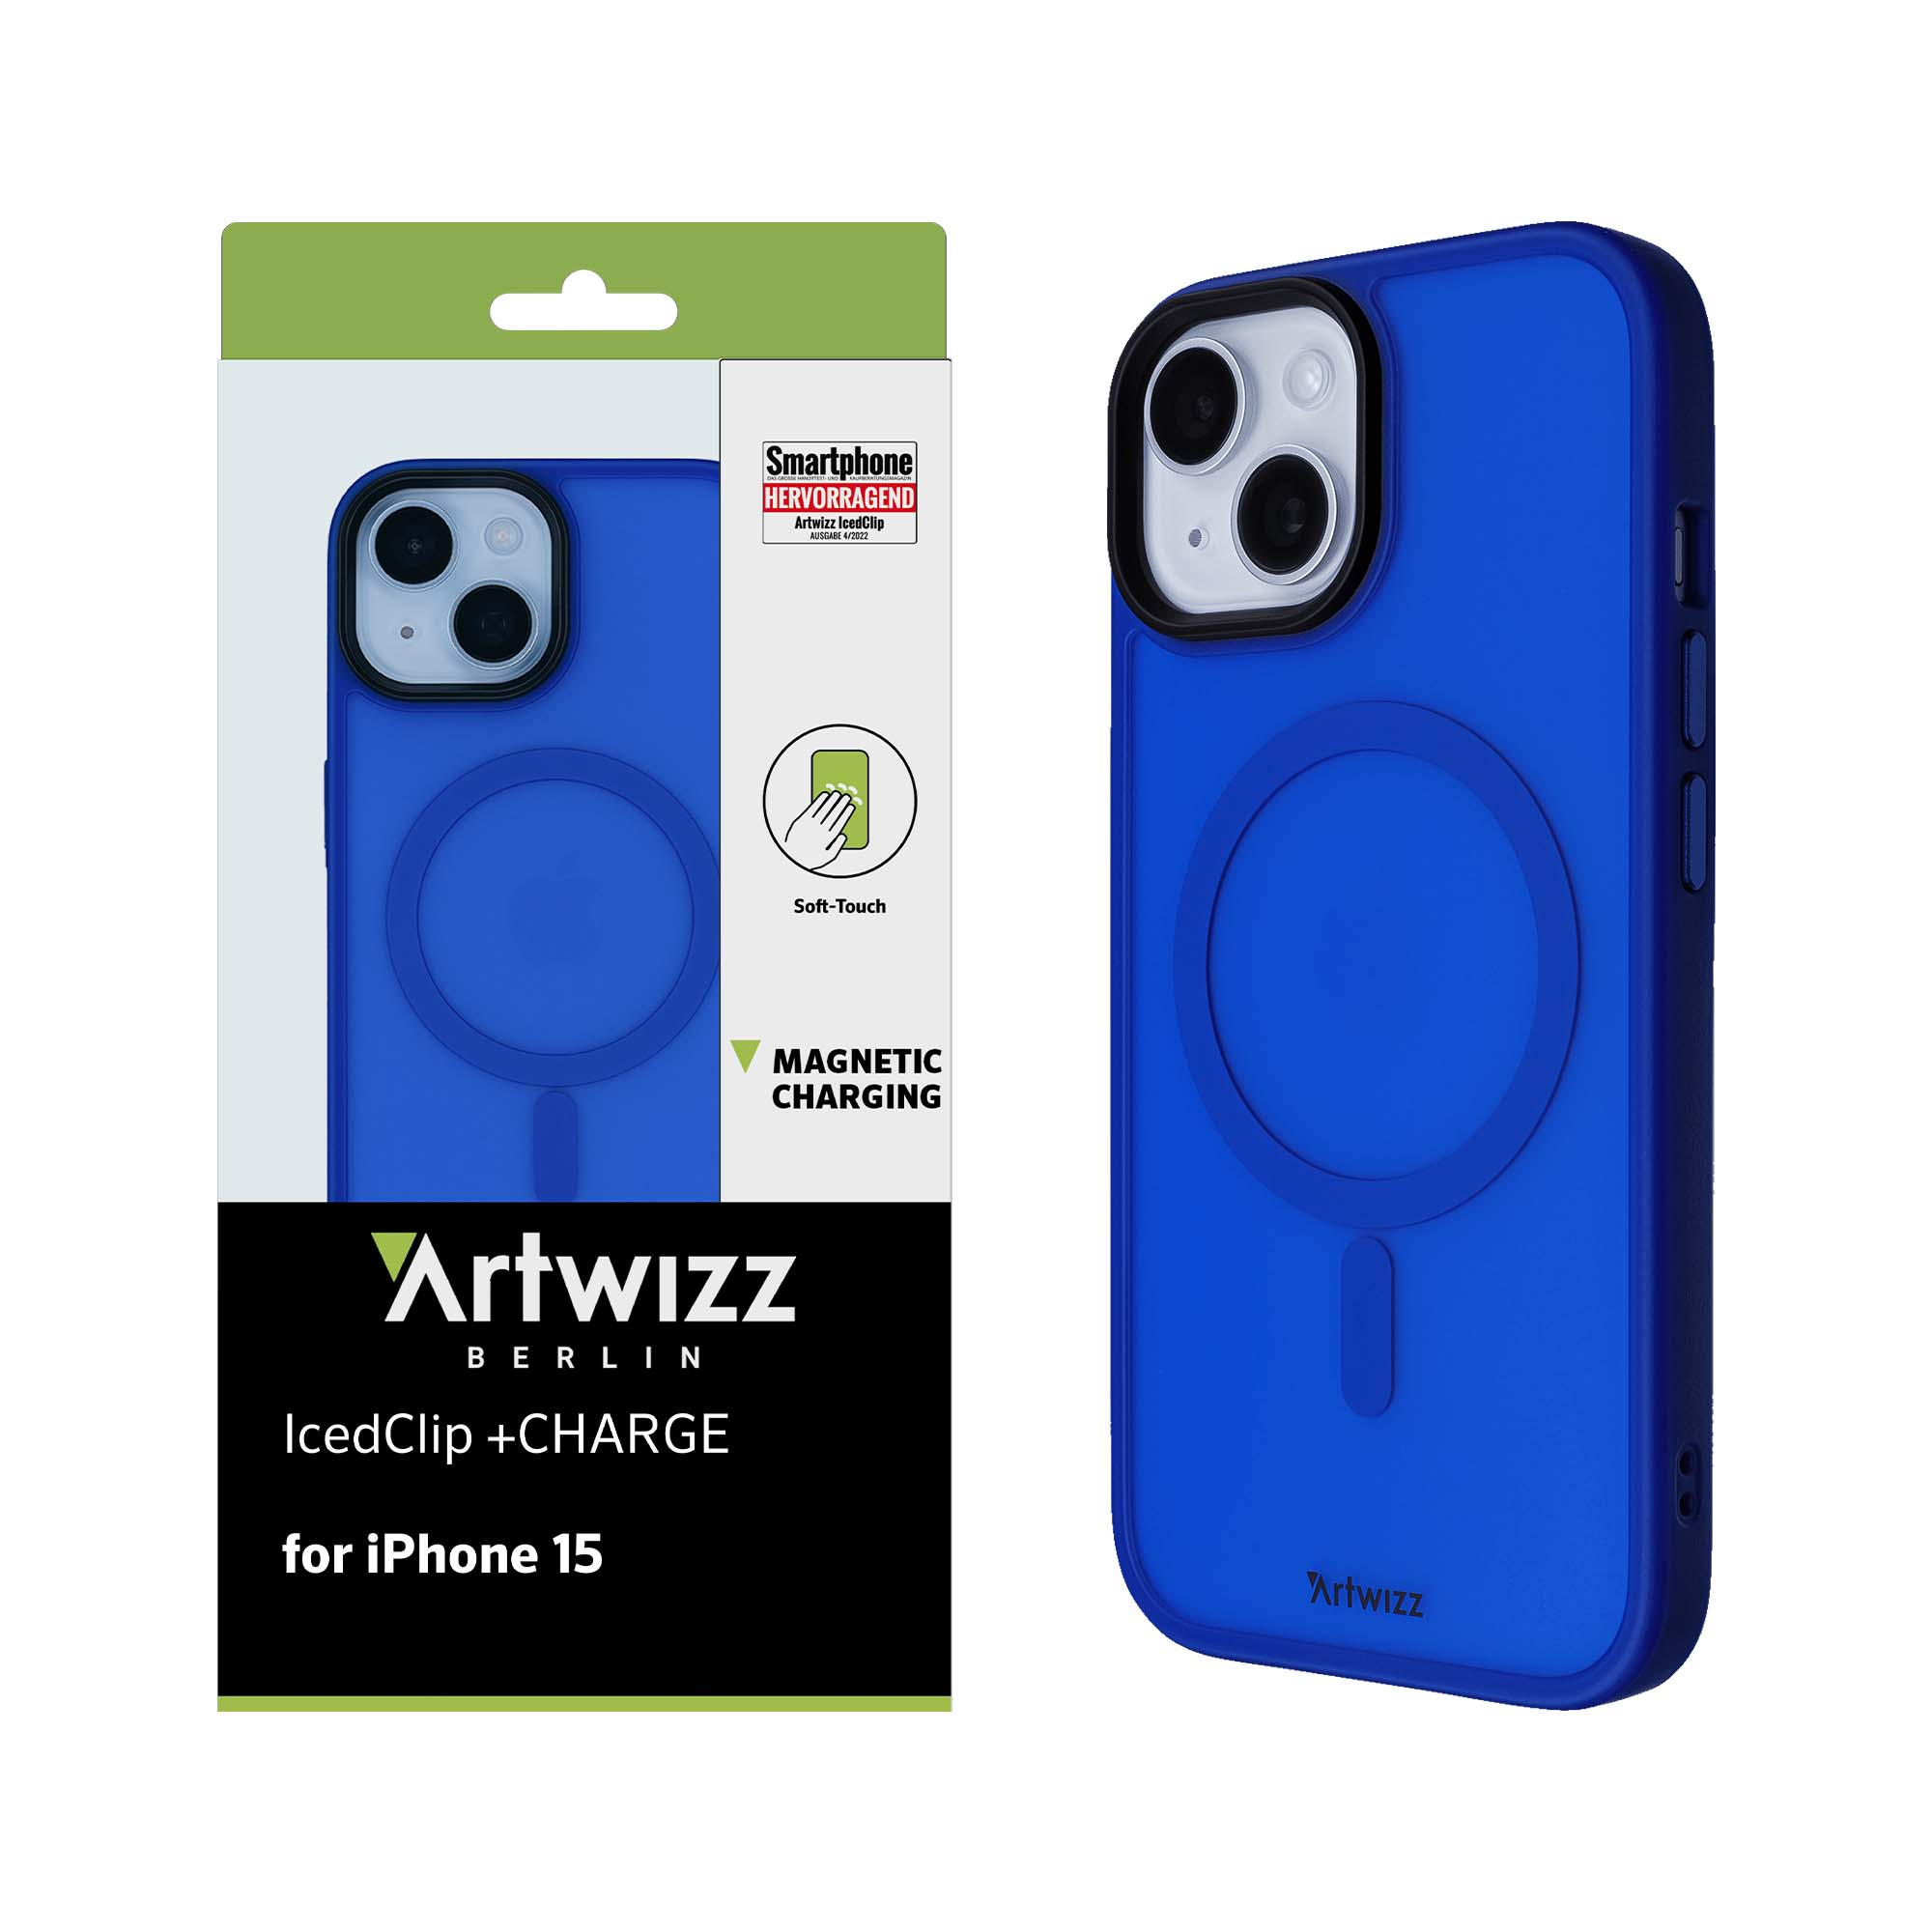 iPhone 15, IcedClip ARTWIZZ +CHARGE, Backcover, Blau Apple,